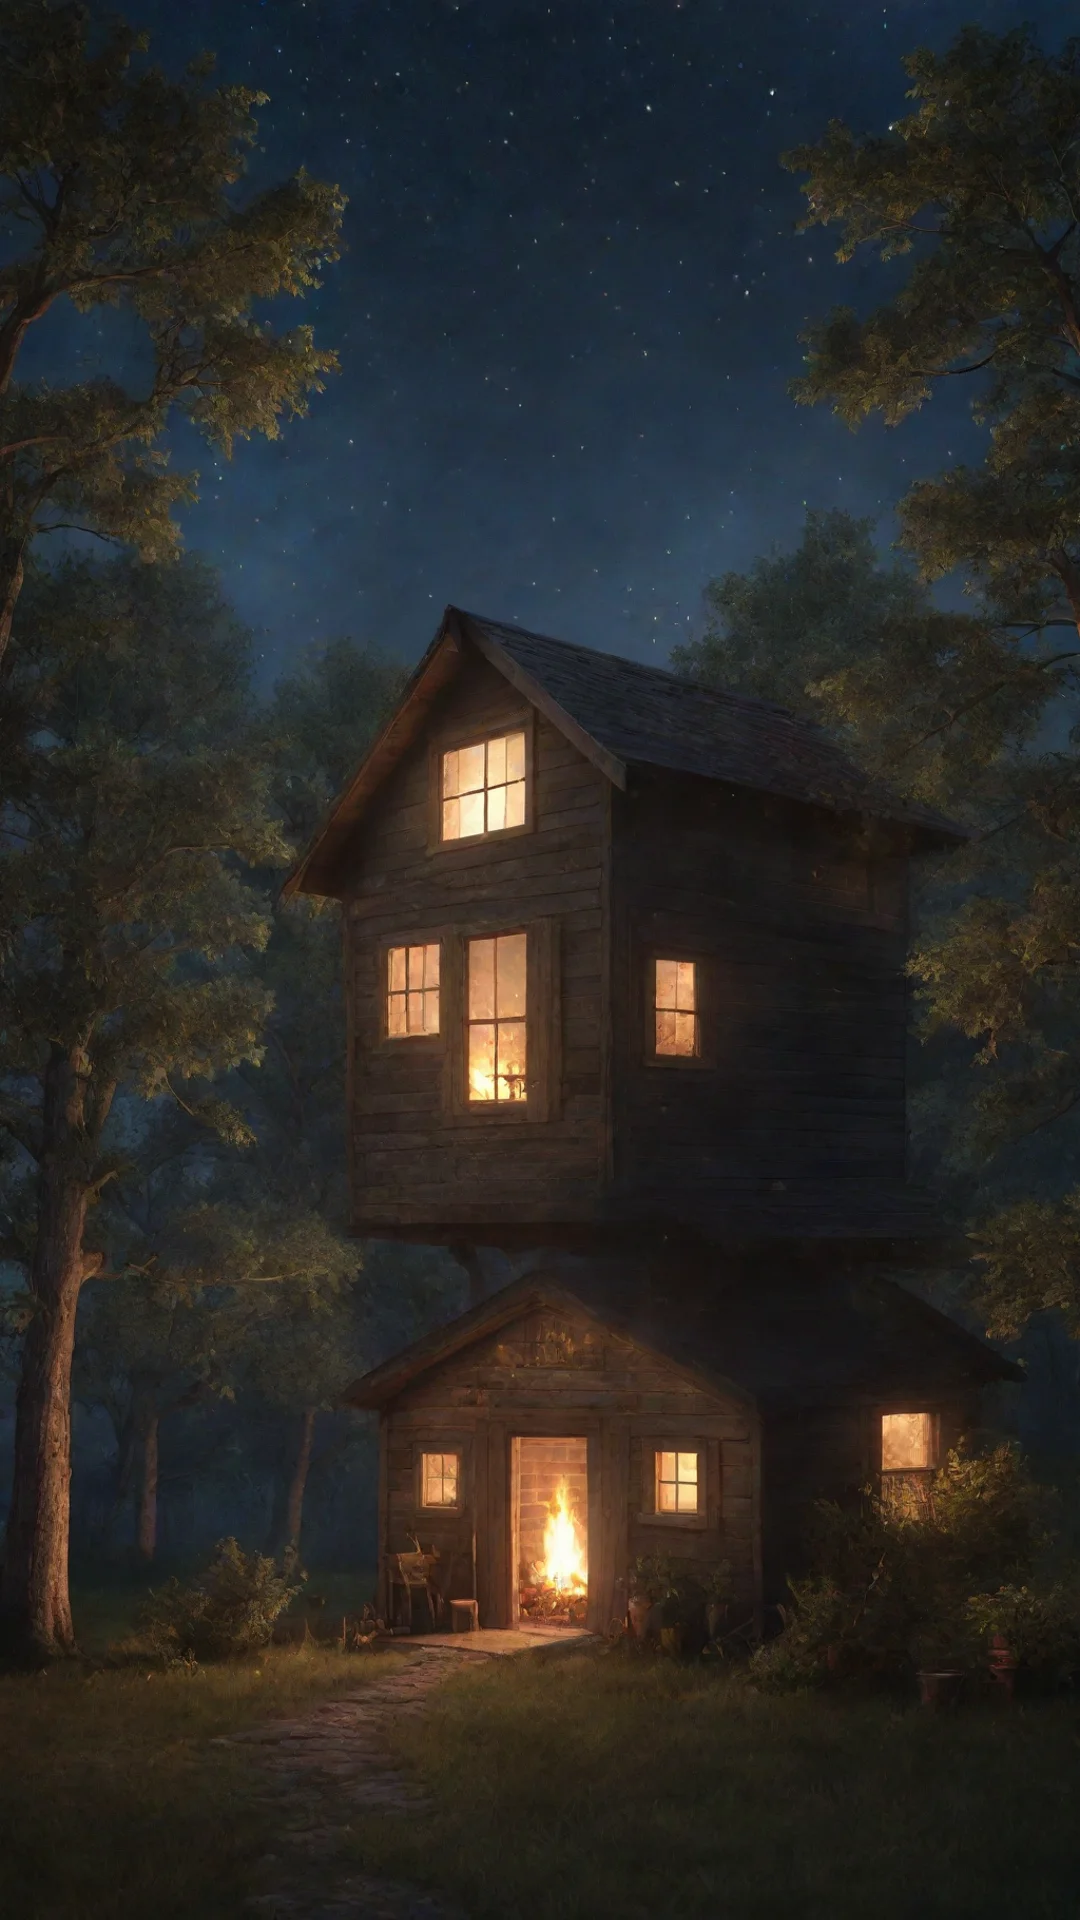 trending night time shed with stars and trees with a warm glow from the windows and a smoking fire. magical and hyper realistic good looking fantastic 1 tall